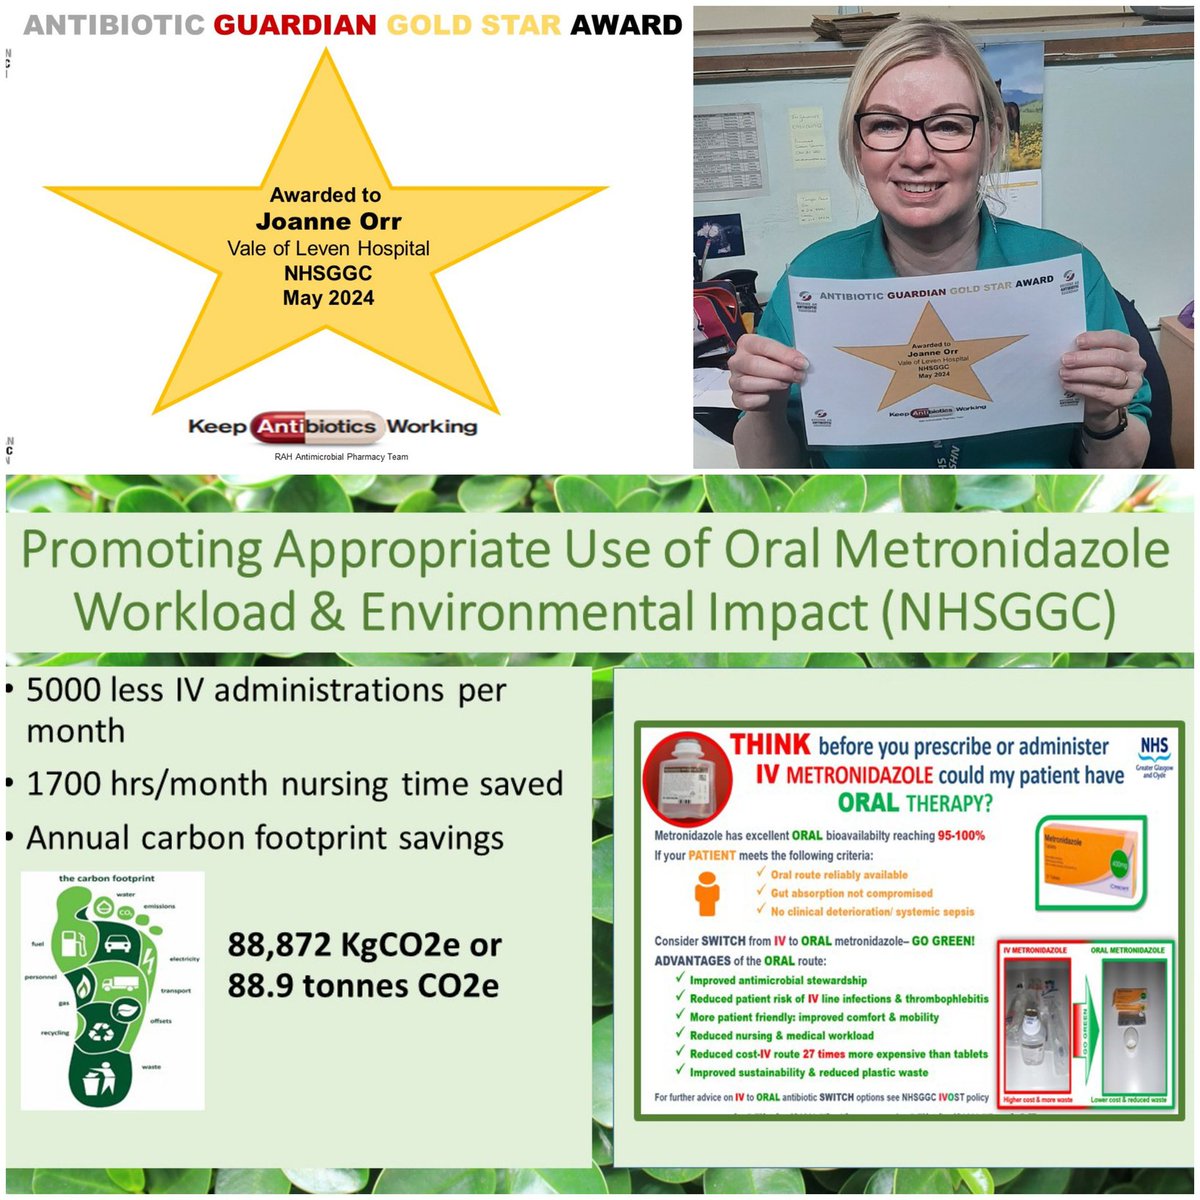 ⭐⭐⭐Gold Star Award⭐⭐⭐
Our April #AntibioticGuardian winner is Joanne from stores at #VOL 🙏 for supporting our #QI work on the carbon 👣 savings of metronidazole #IVOST 🌍 👏👏

@GGCREALMED @NHSGGC @PharmDeclares @SAPGAbx  @SusHealthcare @NHSGGCPharmacy @vale_hospital